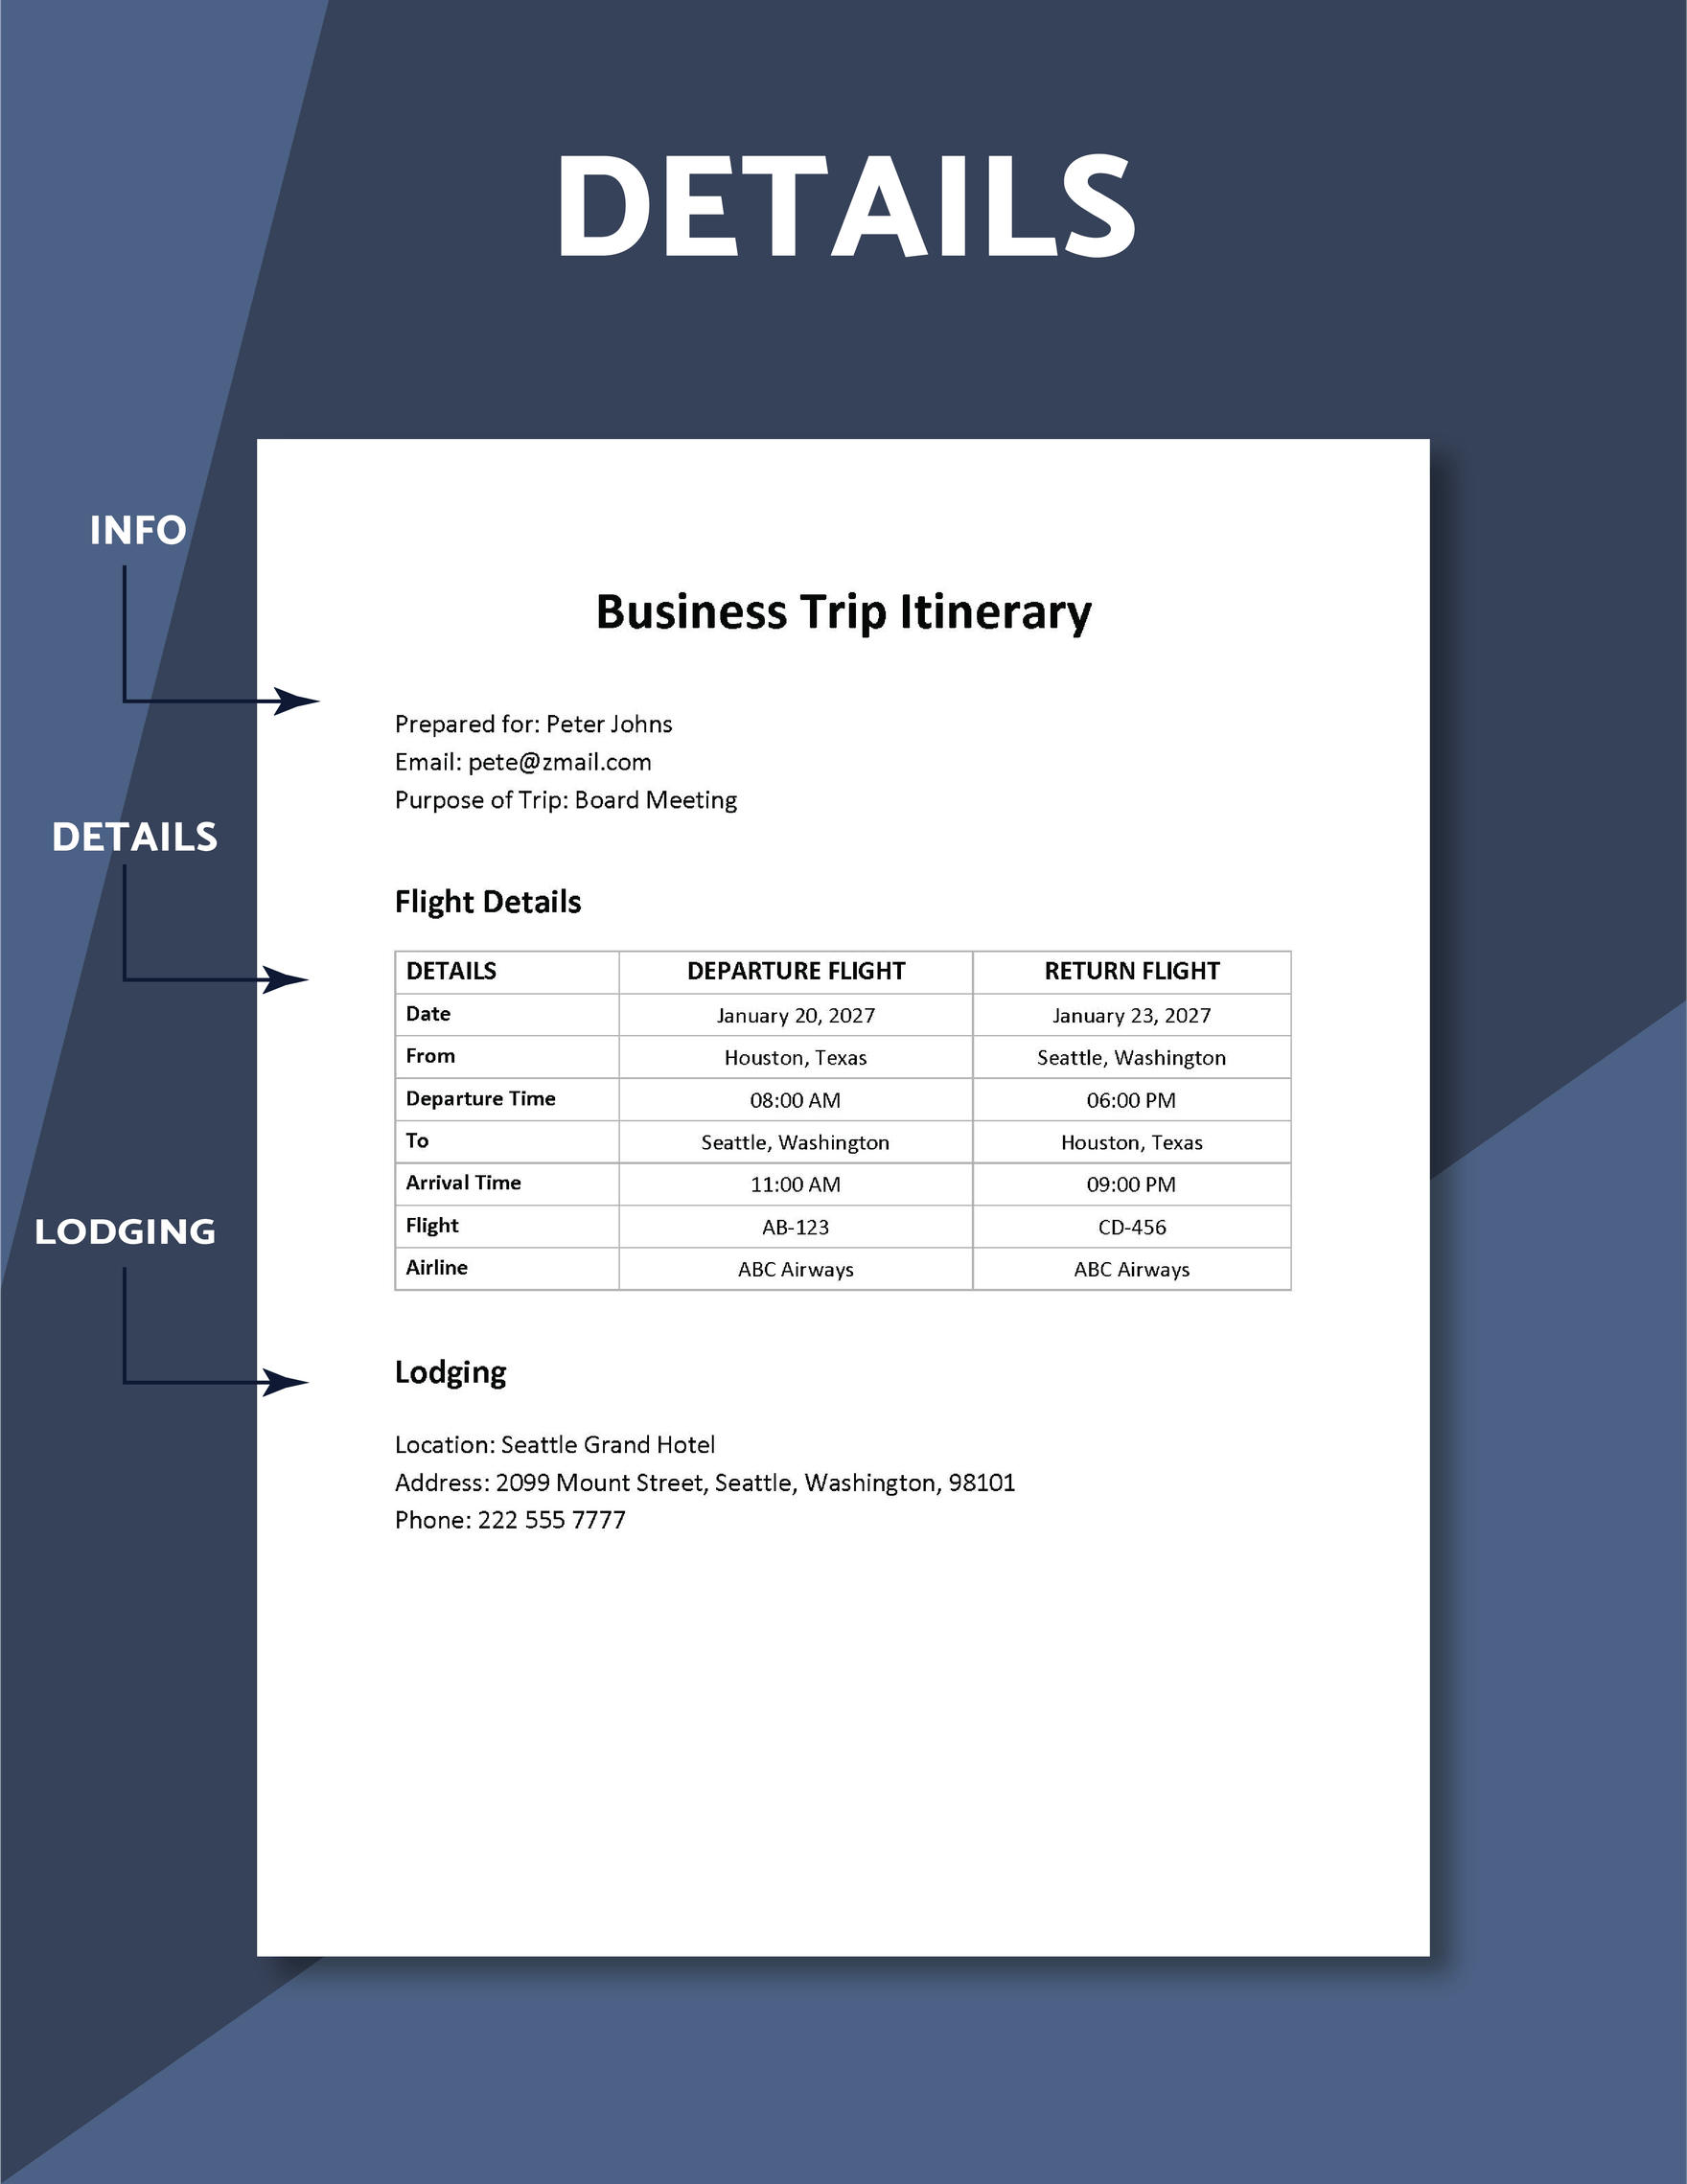 Business Travel Itinerary